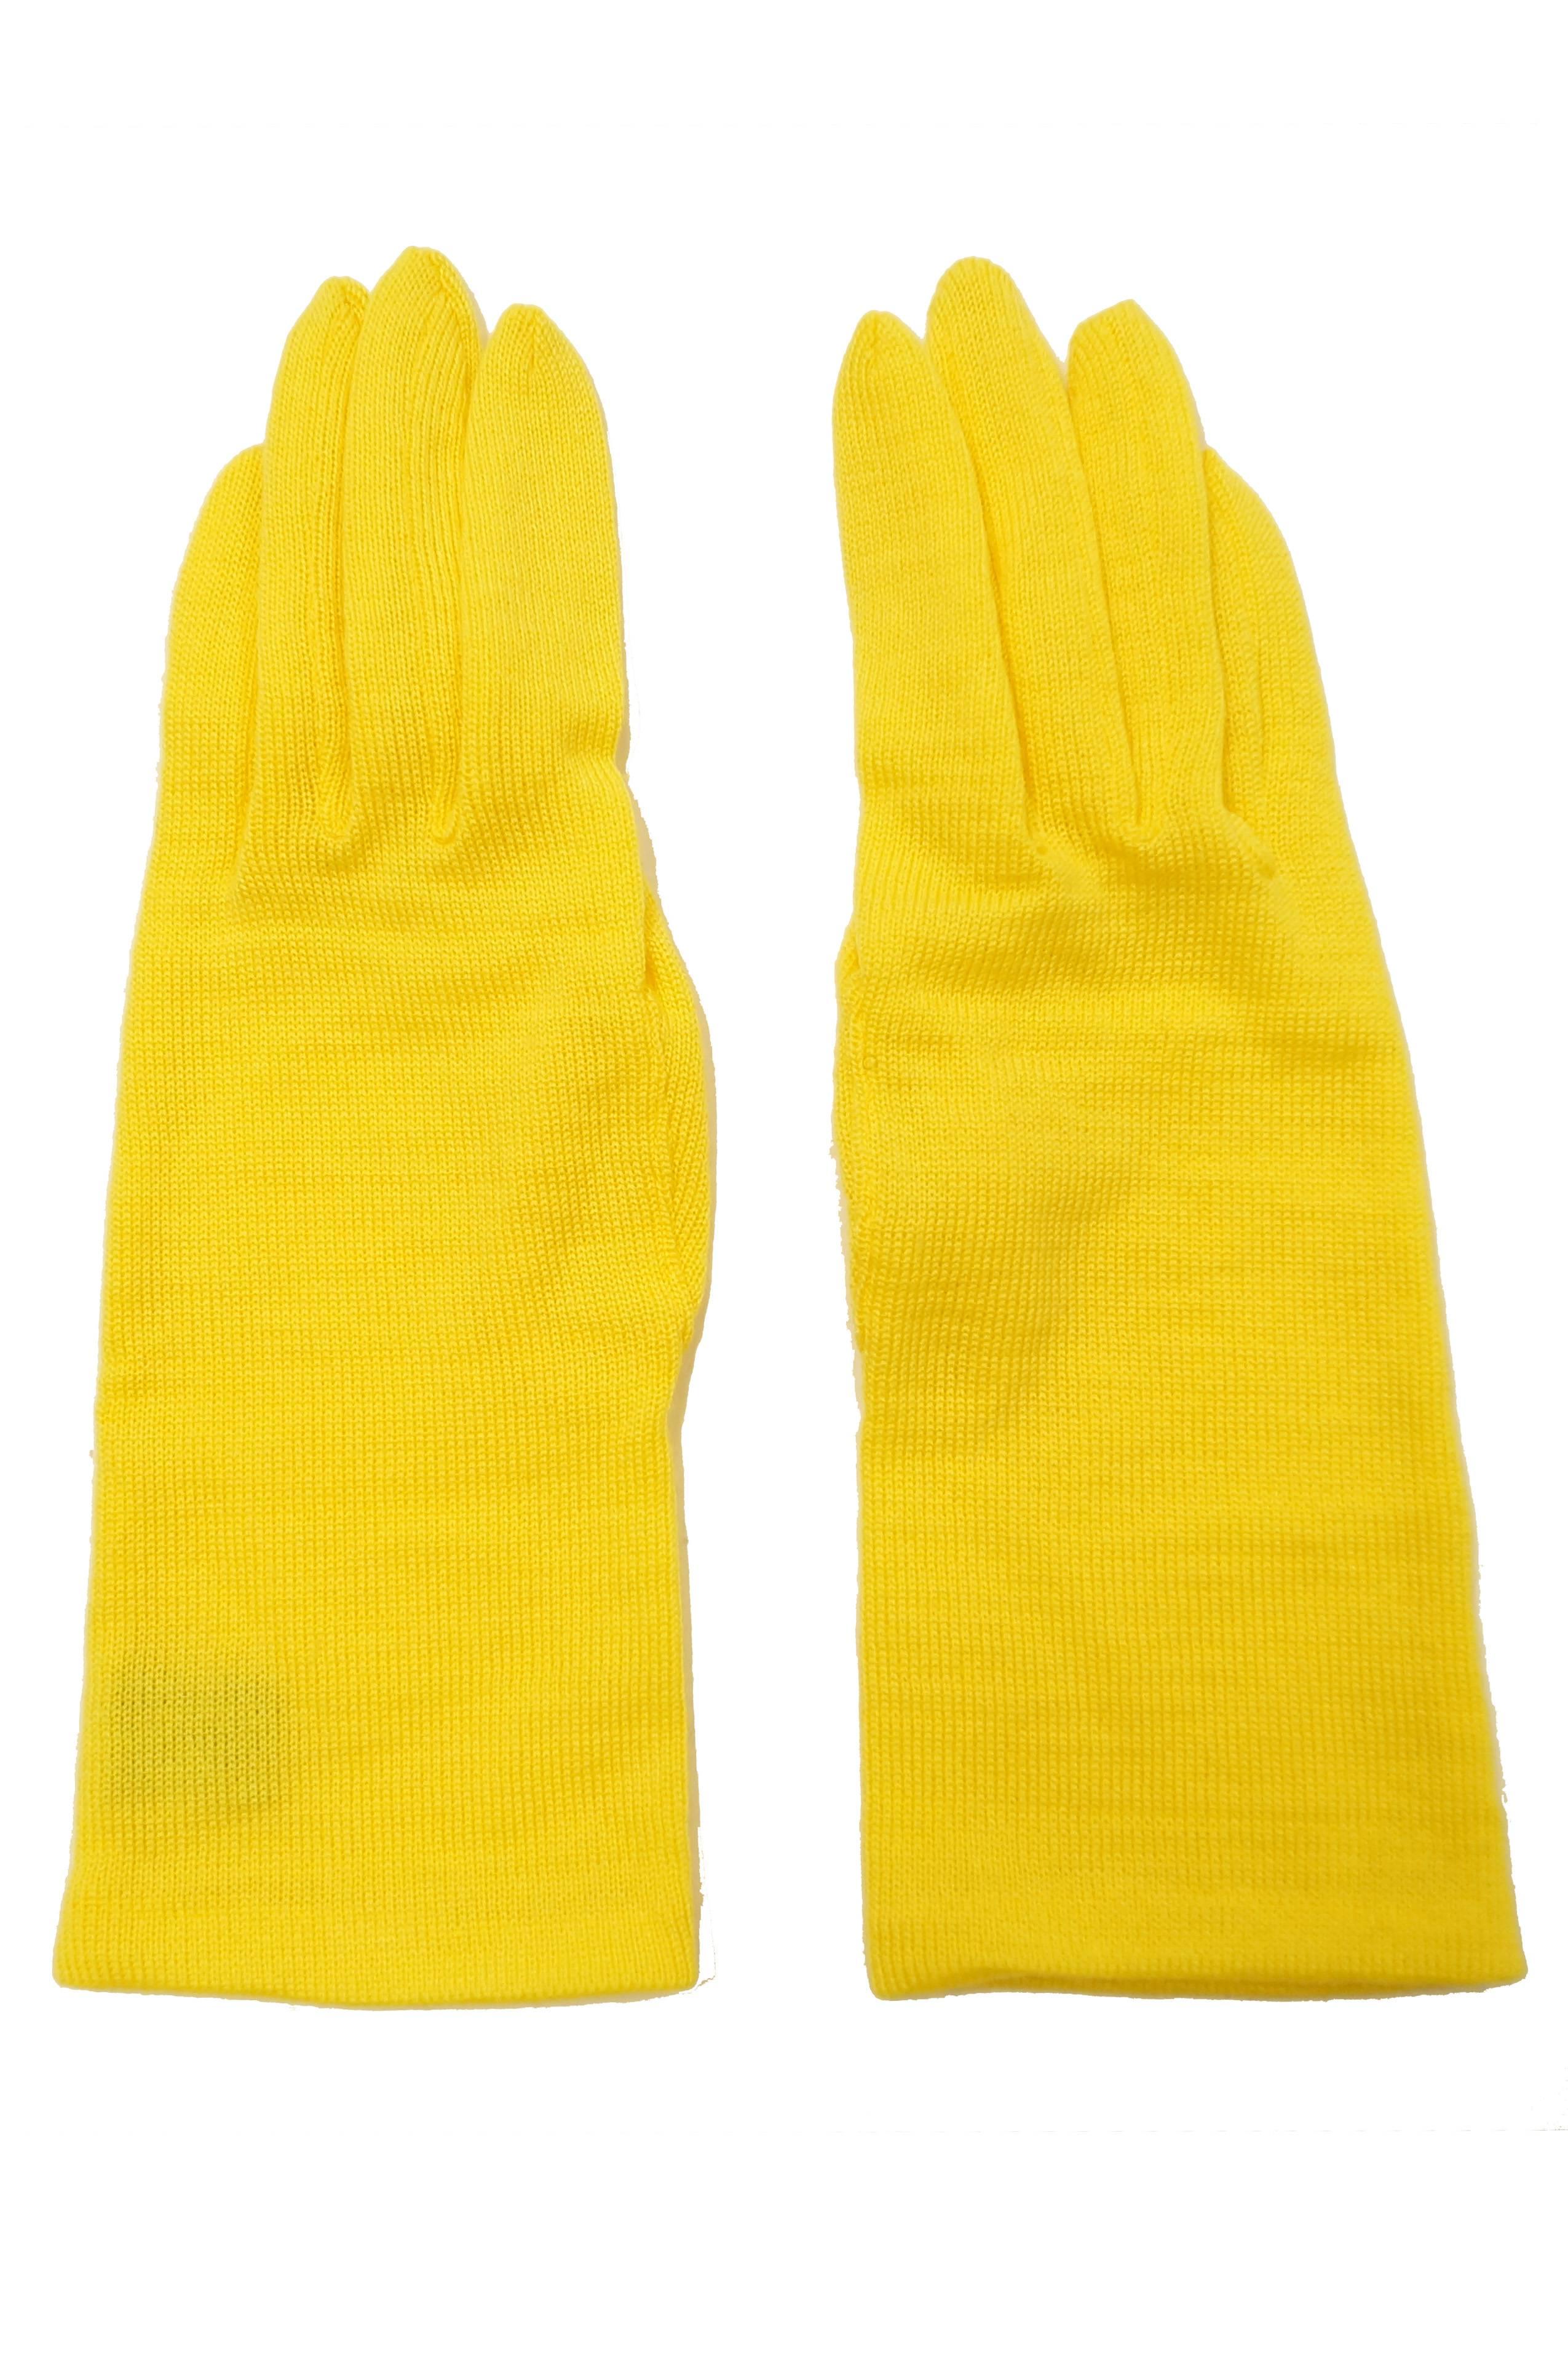 1980s Yohji Yamamoto Yellow Wool Blend Knit Gloves In Excellent Condition For Sale In Houston, TX